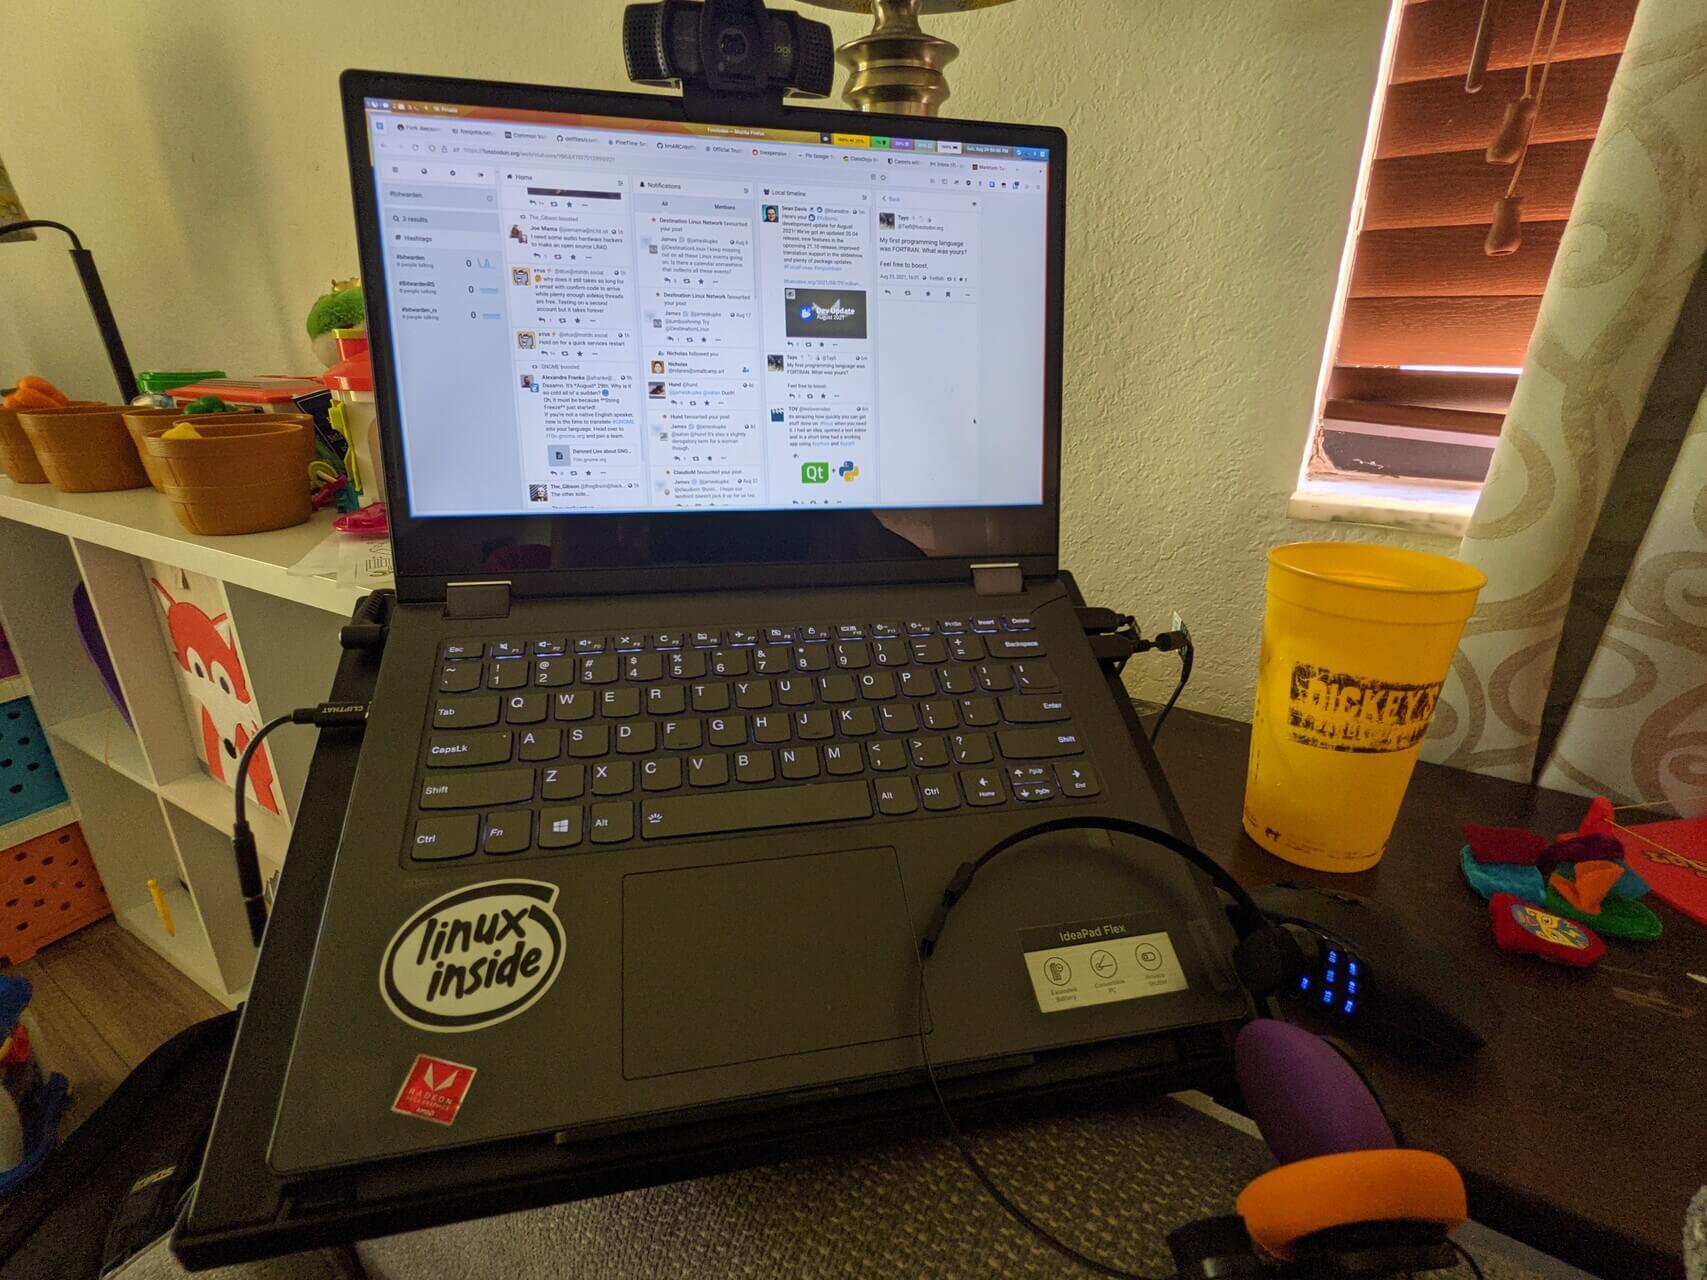 Laptop with webcam, mouse, and headphones on a stand